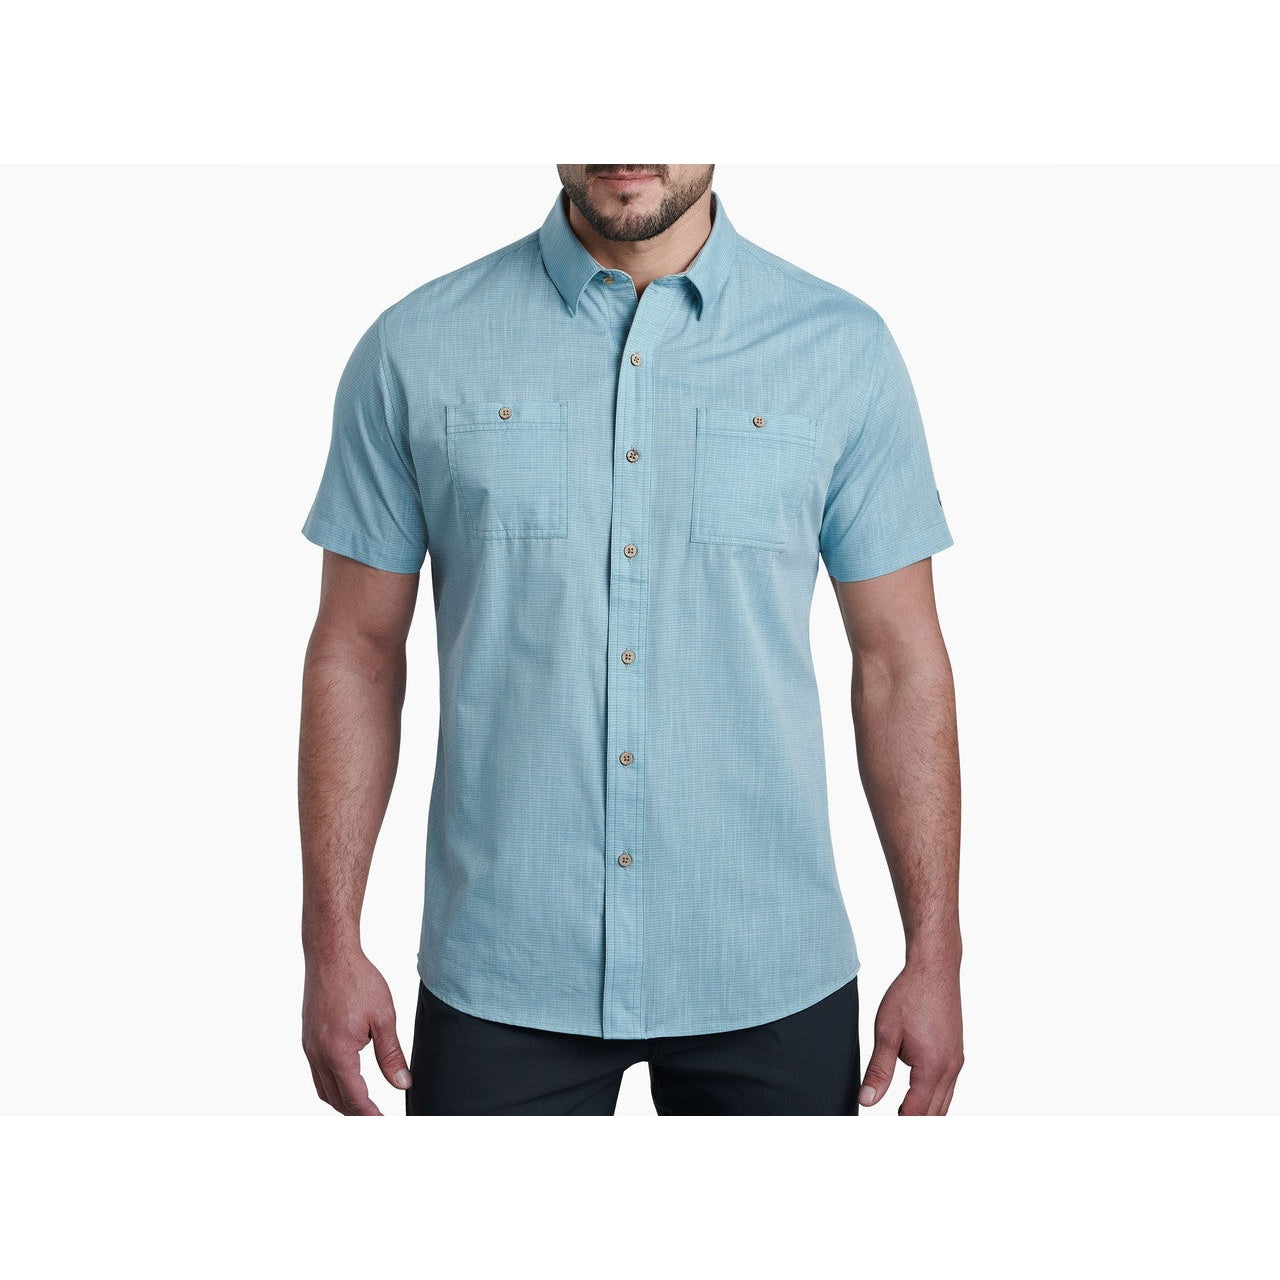 Kuhl Karib Stripe S/S Shirt-MENS CLOTHING-CLEAR WATER-S-Kevin's Fine Outdoor Gear & Apparel